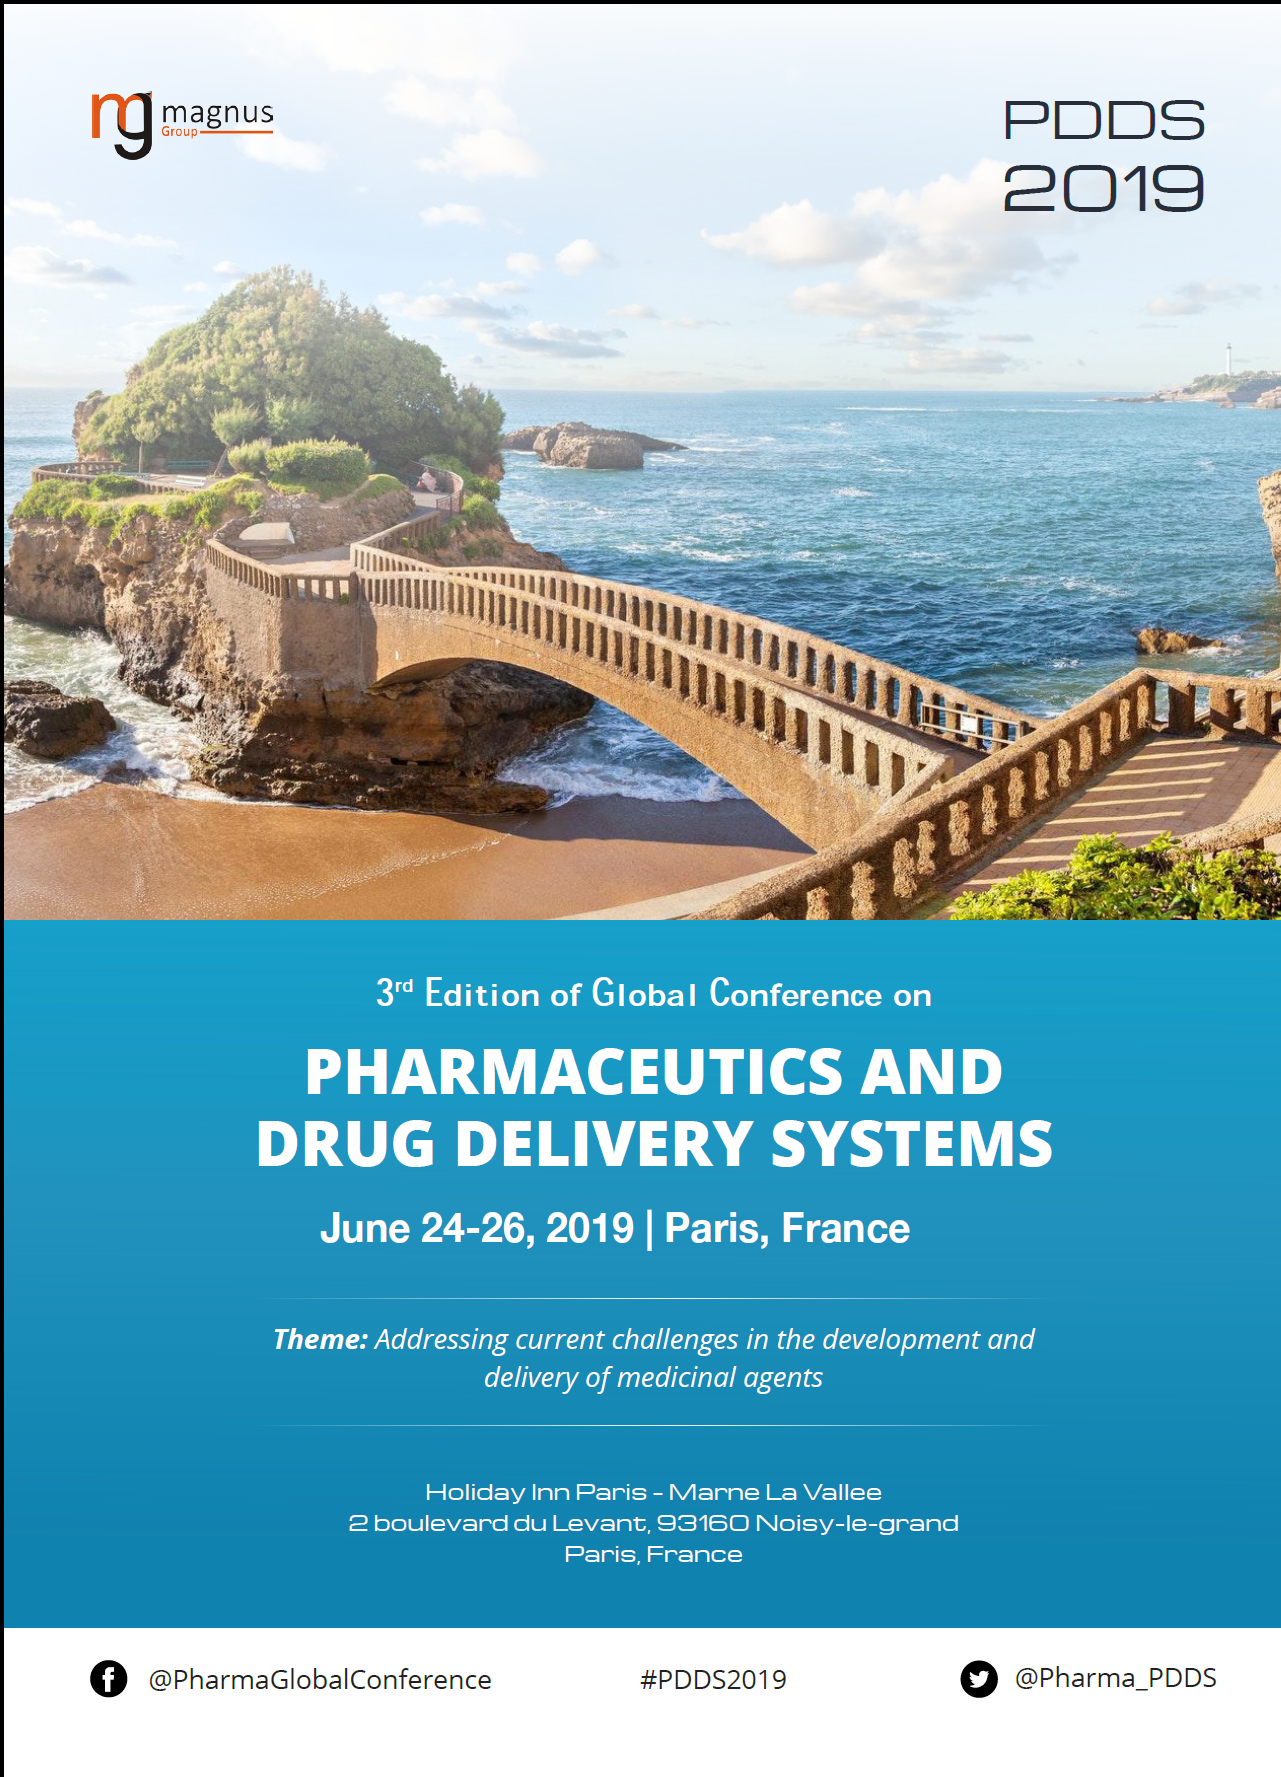 3rd Edition of Global conference on Pharmaceutics and Drug Delivery Systems Program